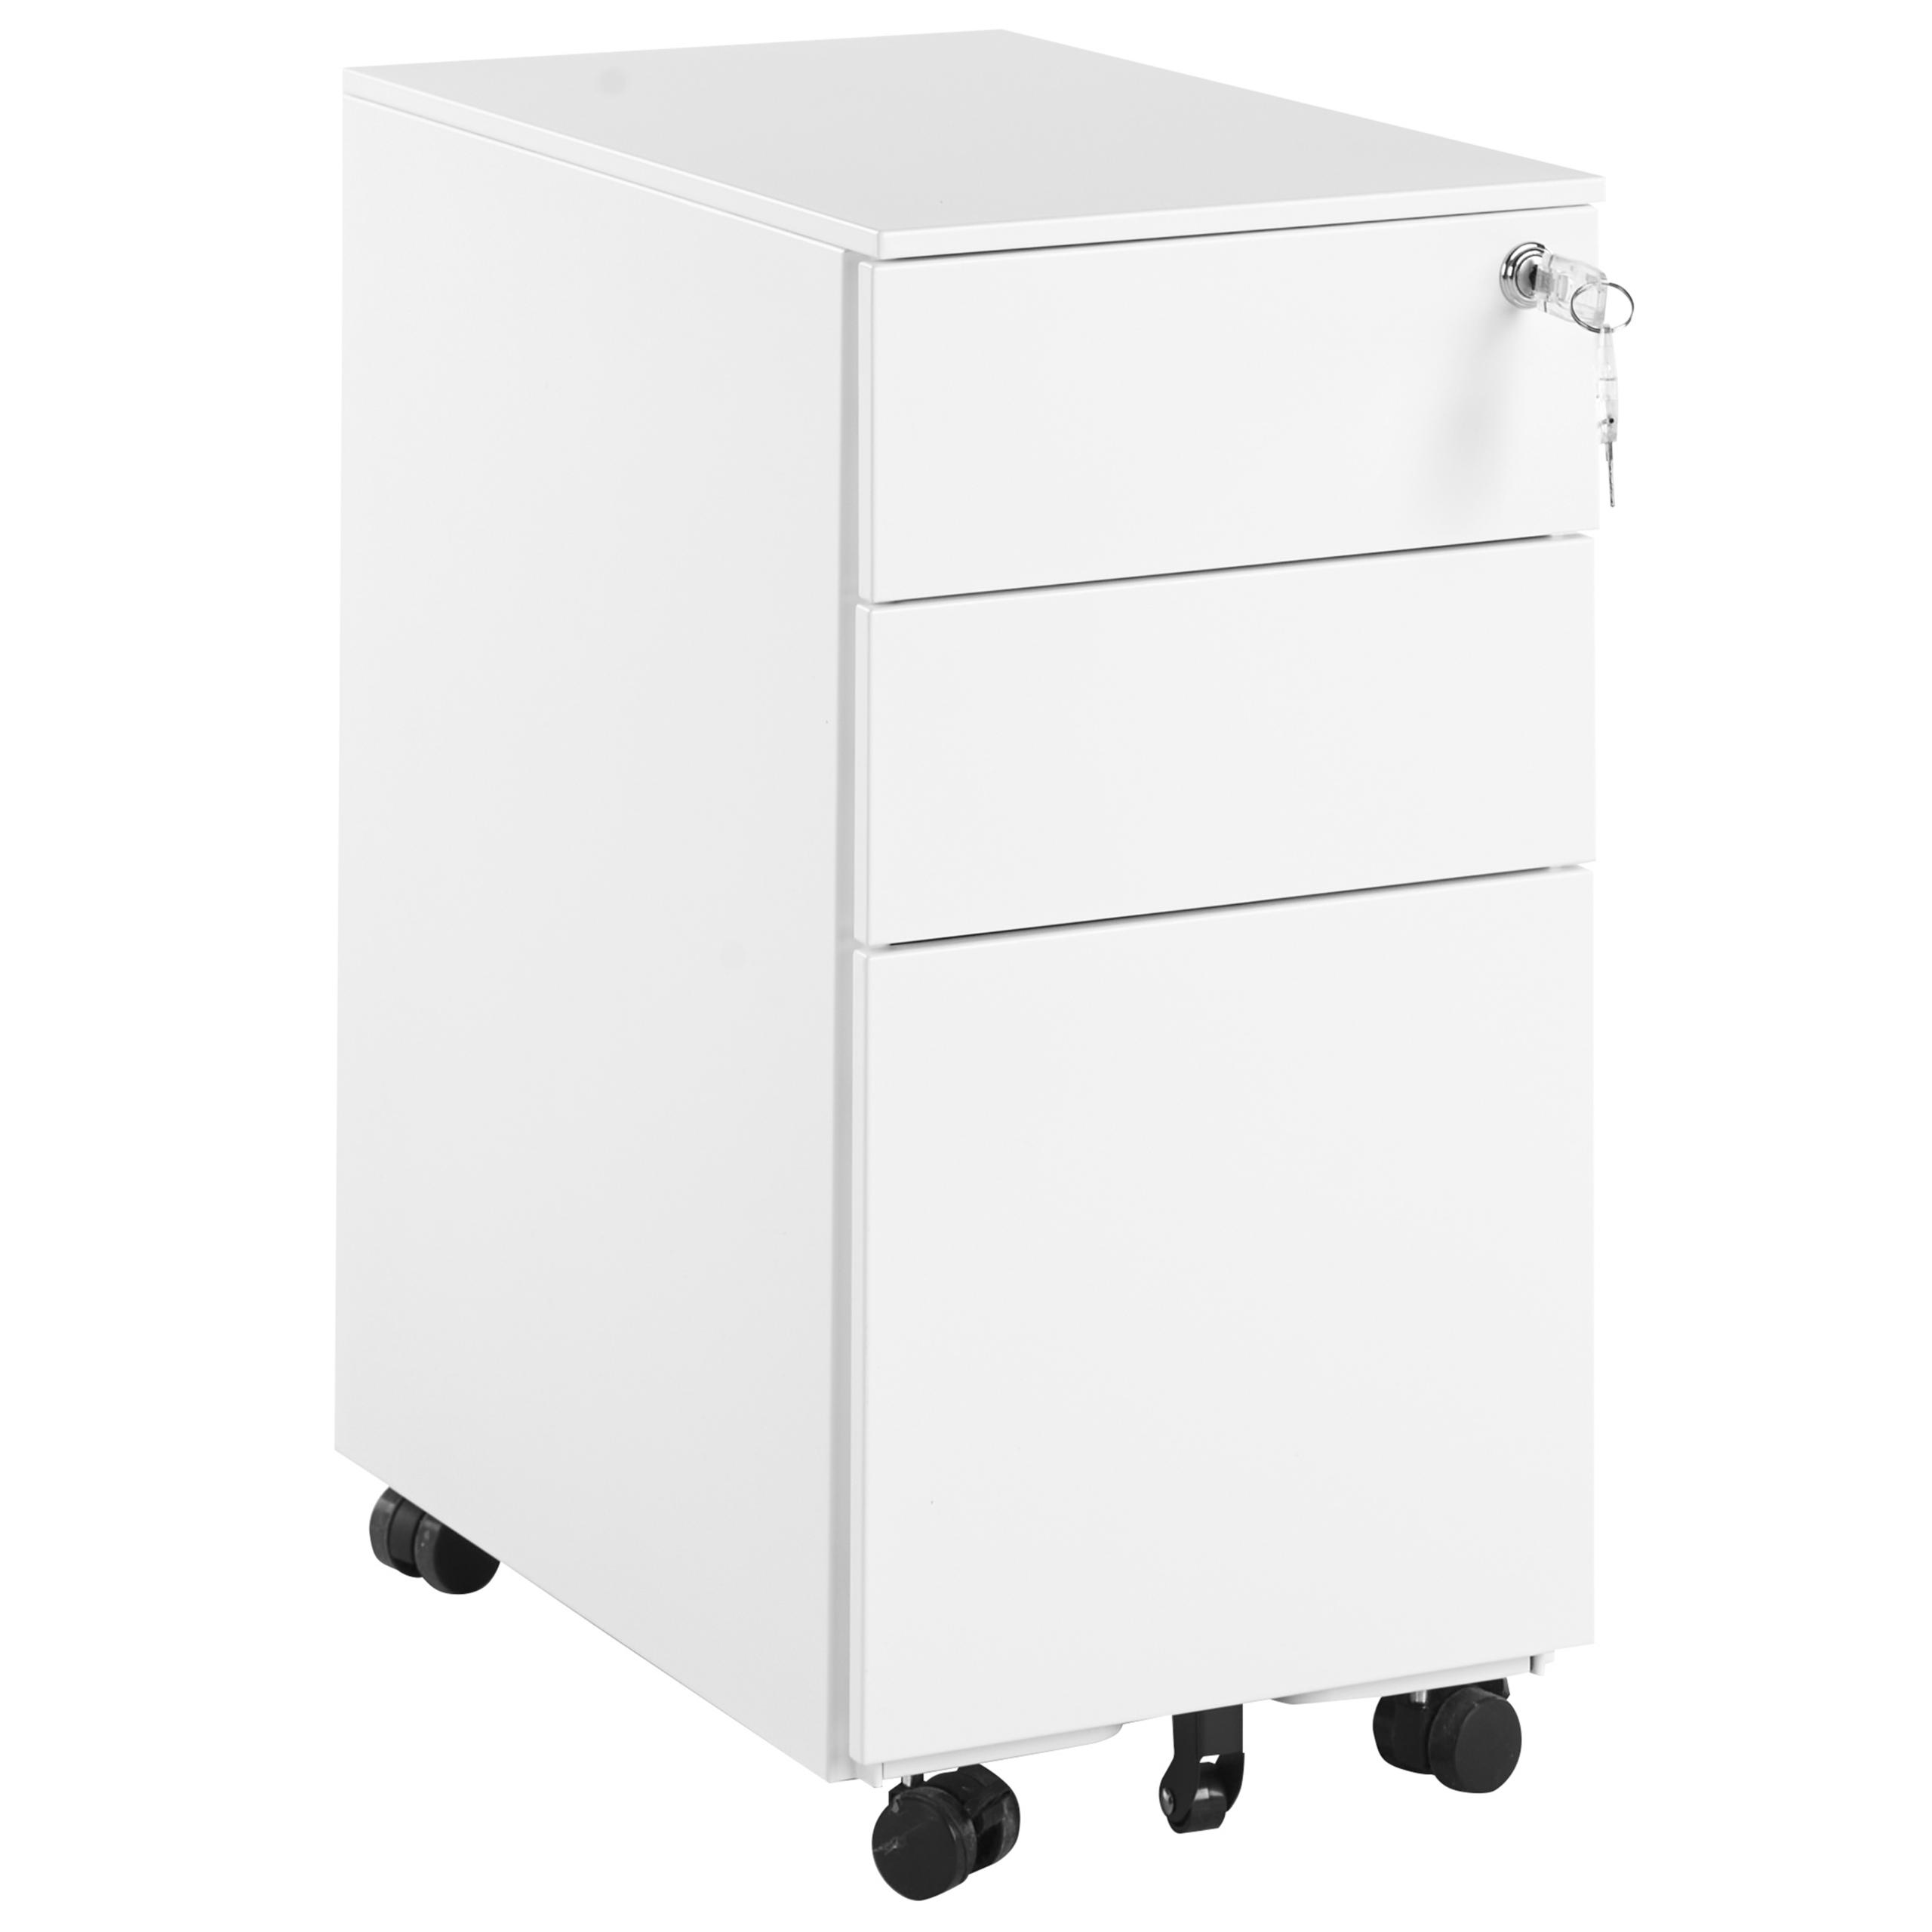 Beliani Storage Cabinet White Metal with 3 Drawers Key Lock Castors Industrial Modern Home Office Garage Material:Metal Size:50x60x30